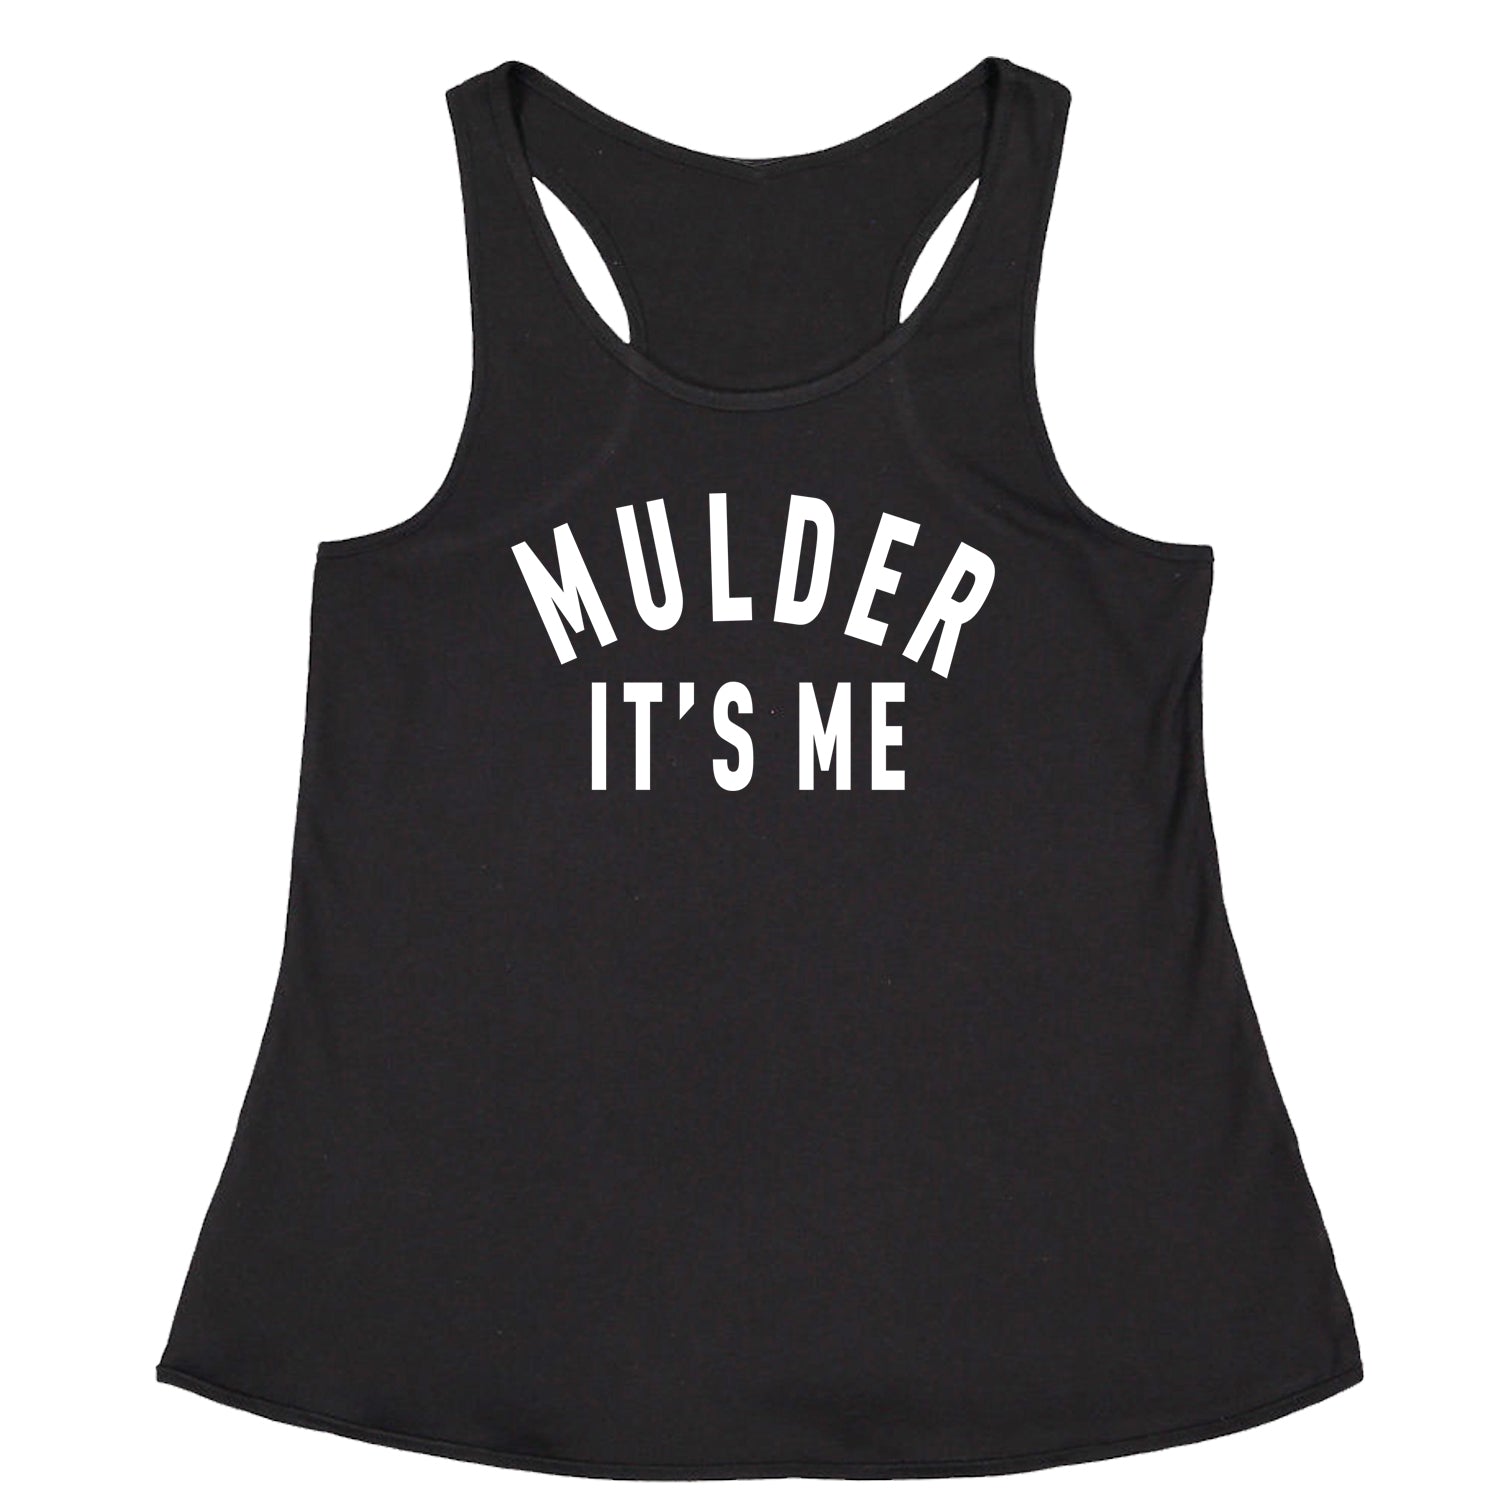 Mulder, It's Me Racerback Tank Top for Women 51, area, believe, files, is, mulder, out, scully, the, there, truth, x, xfiles by Expression Tees